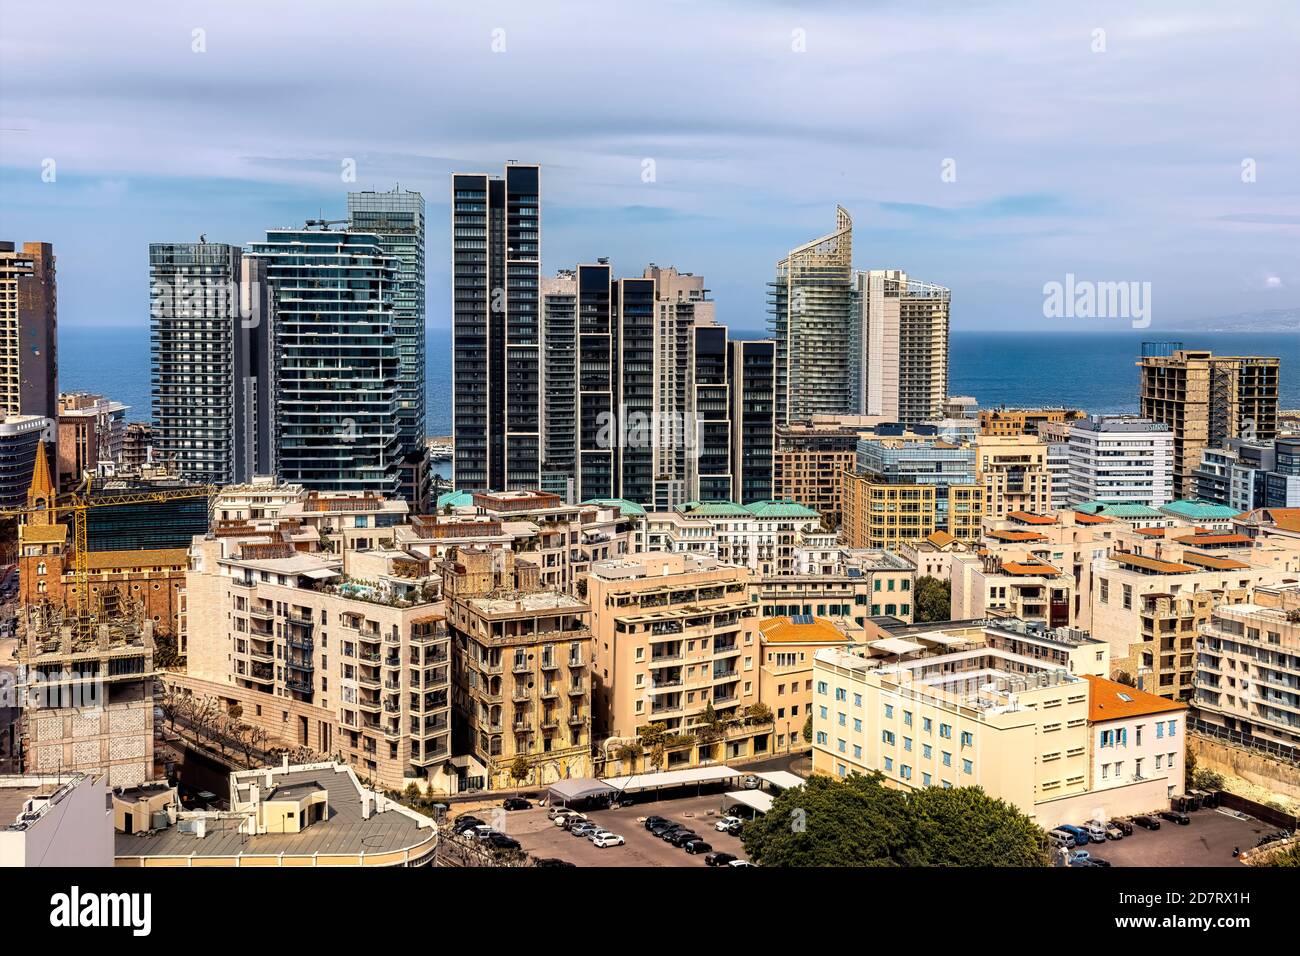 Beirut Downtown cityscape with Old Beirut appearing in the foreground Stock Photo